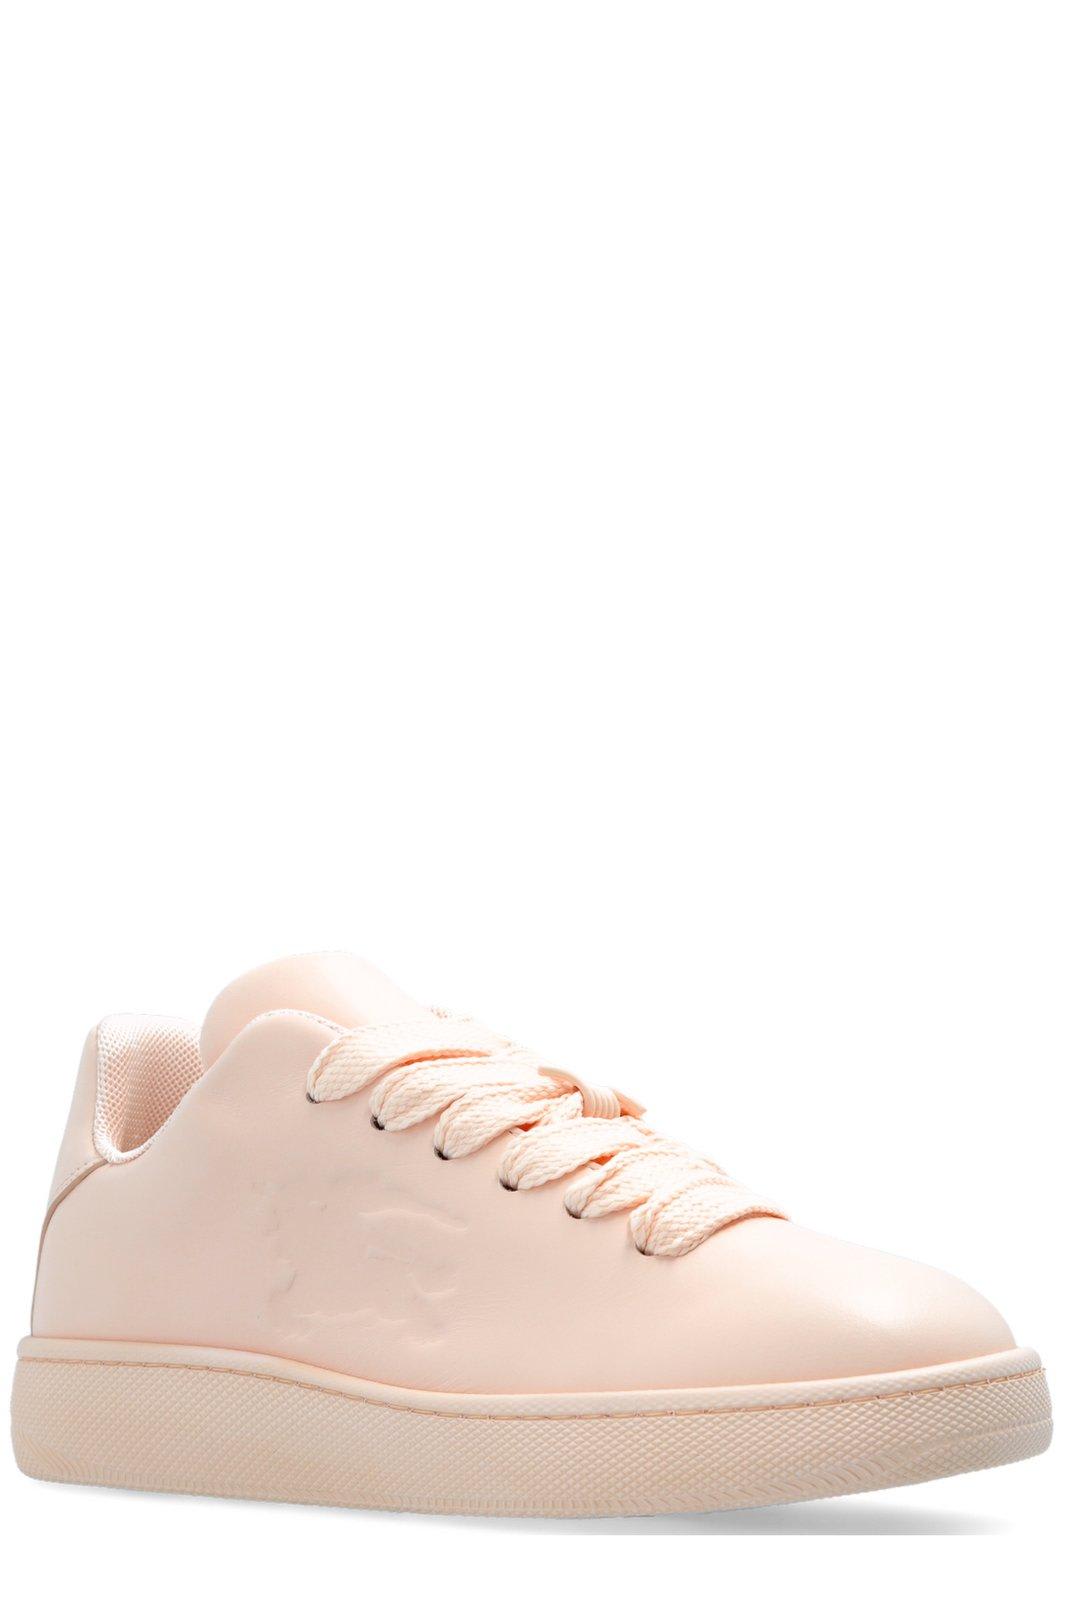 Shop Burberry Box Equestrian Knight Embossed Sneakers In Pink